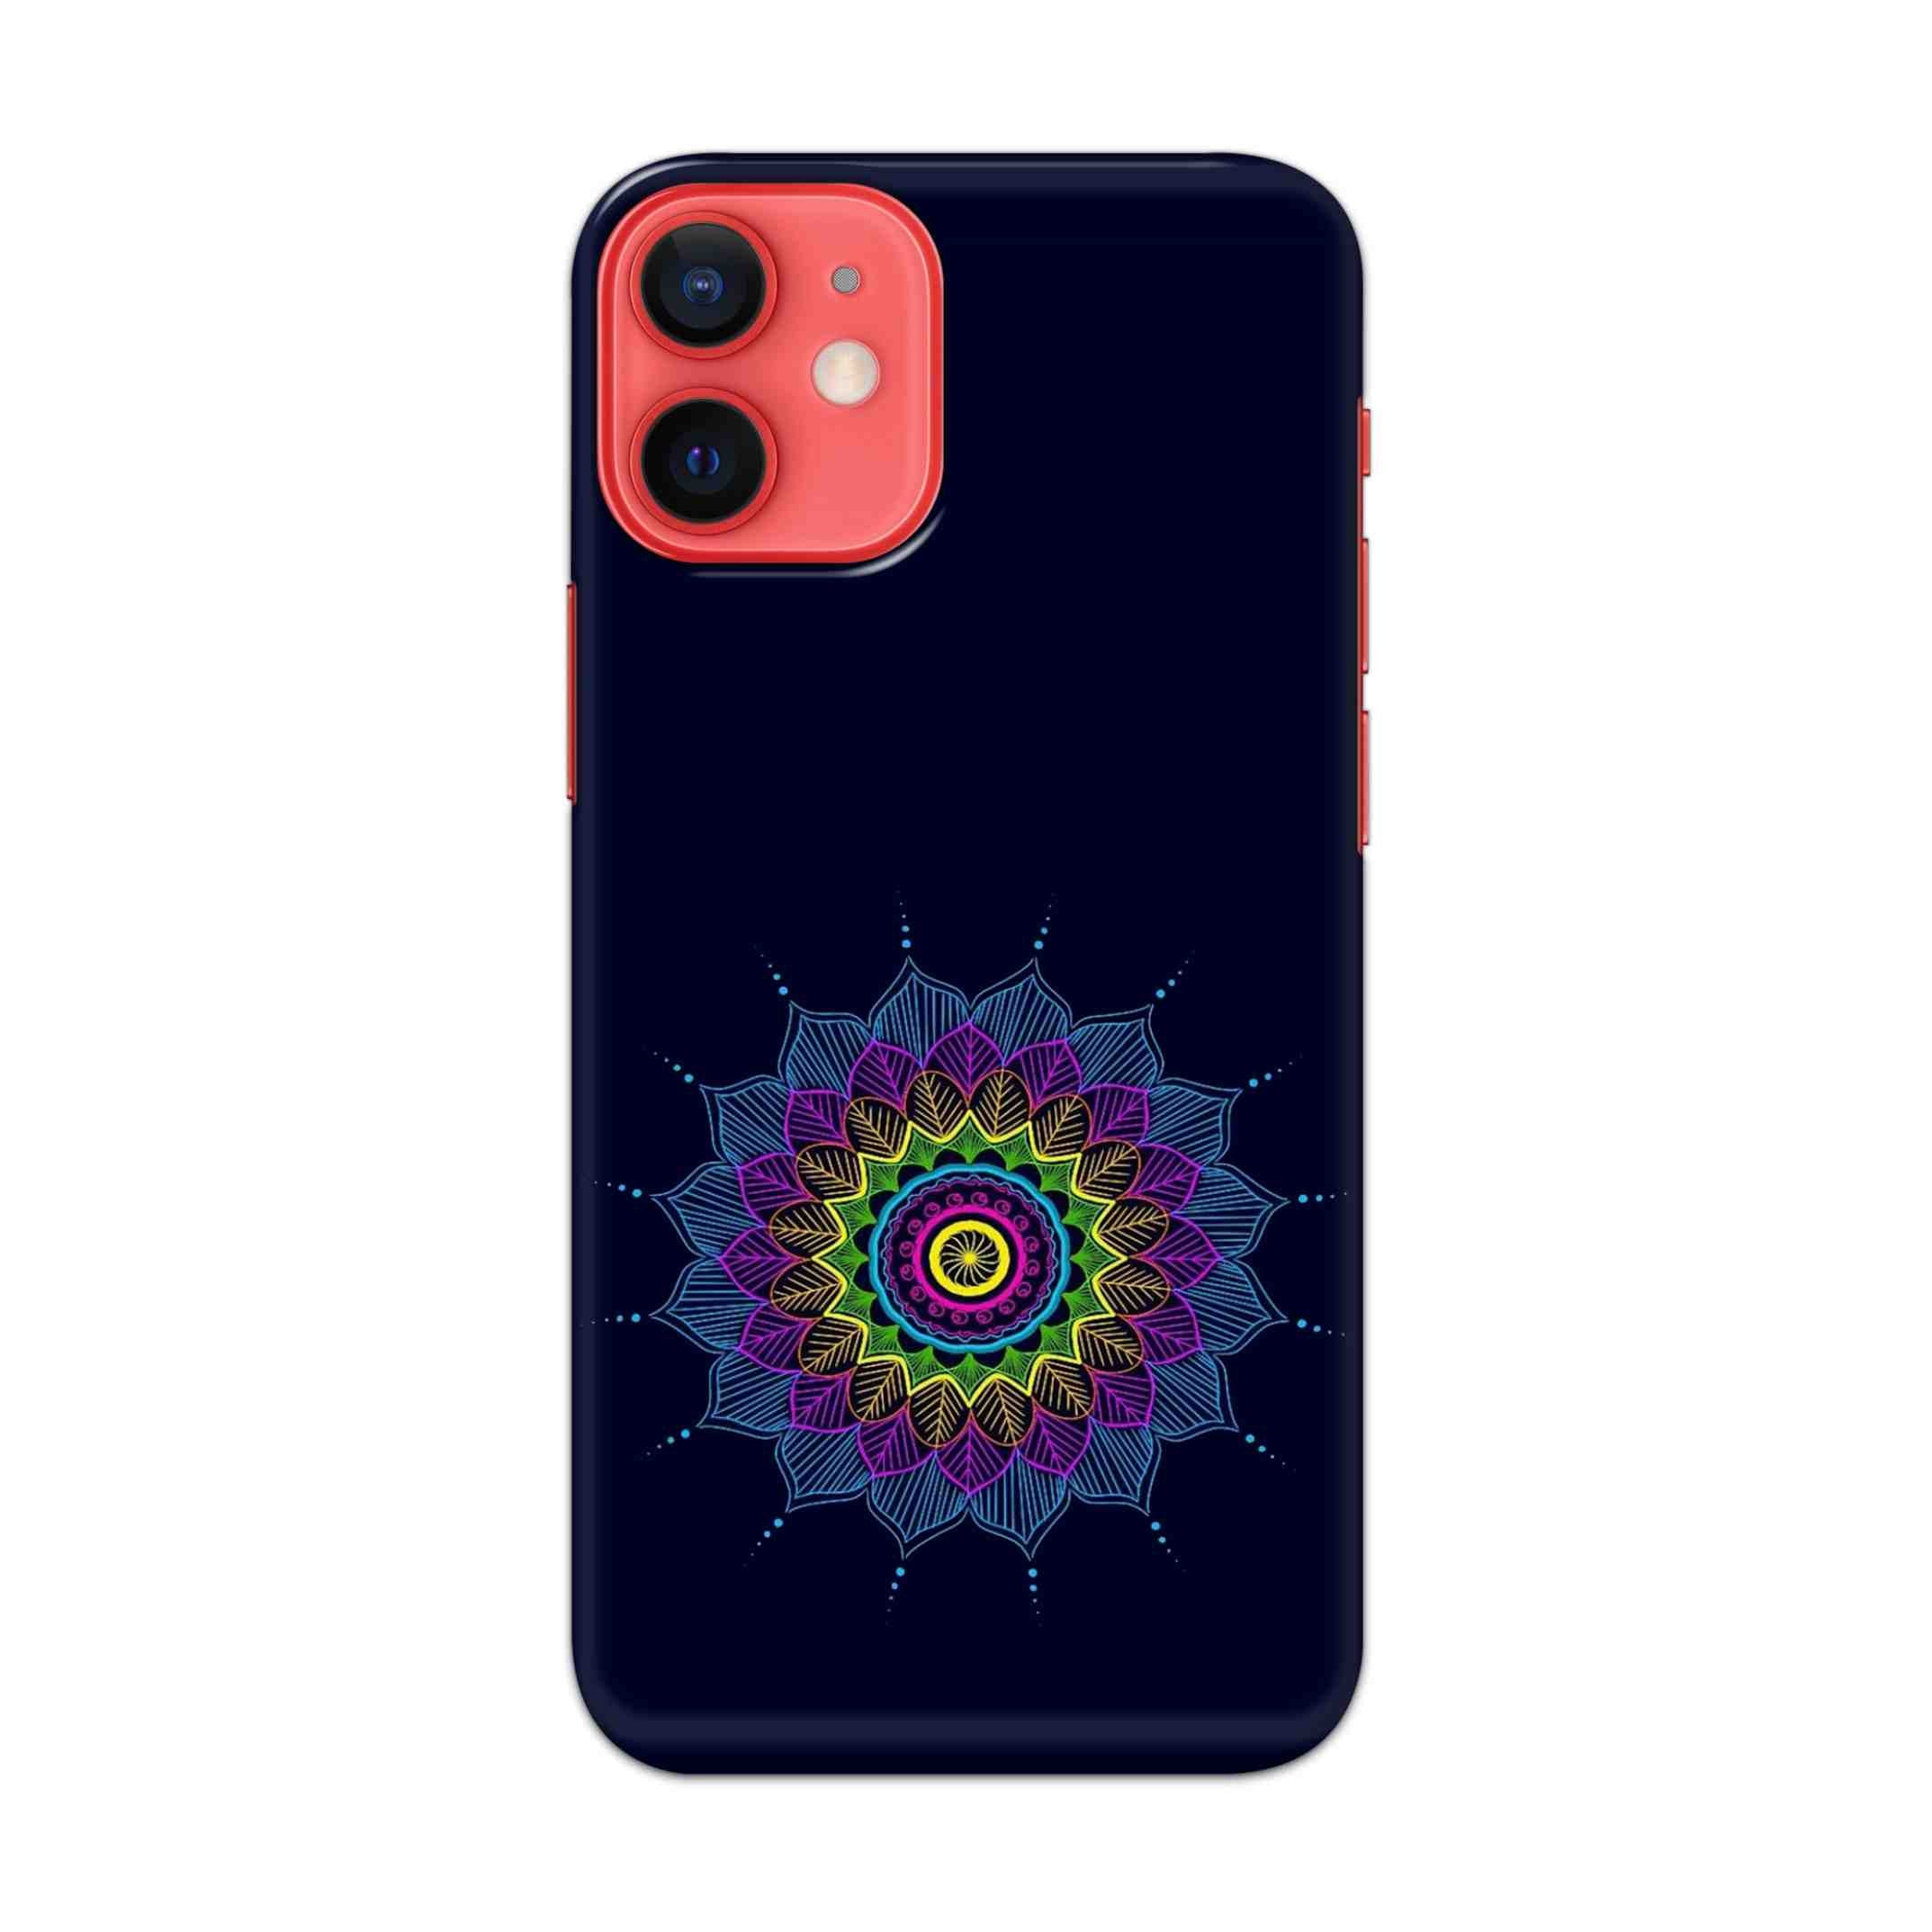 Buy Jung And Mandalas Hard Back Mobile Phone Case/Cover For Apple iPhone 12 mini Online